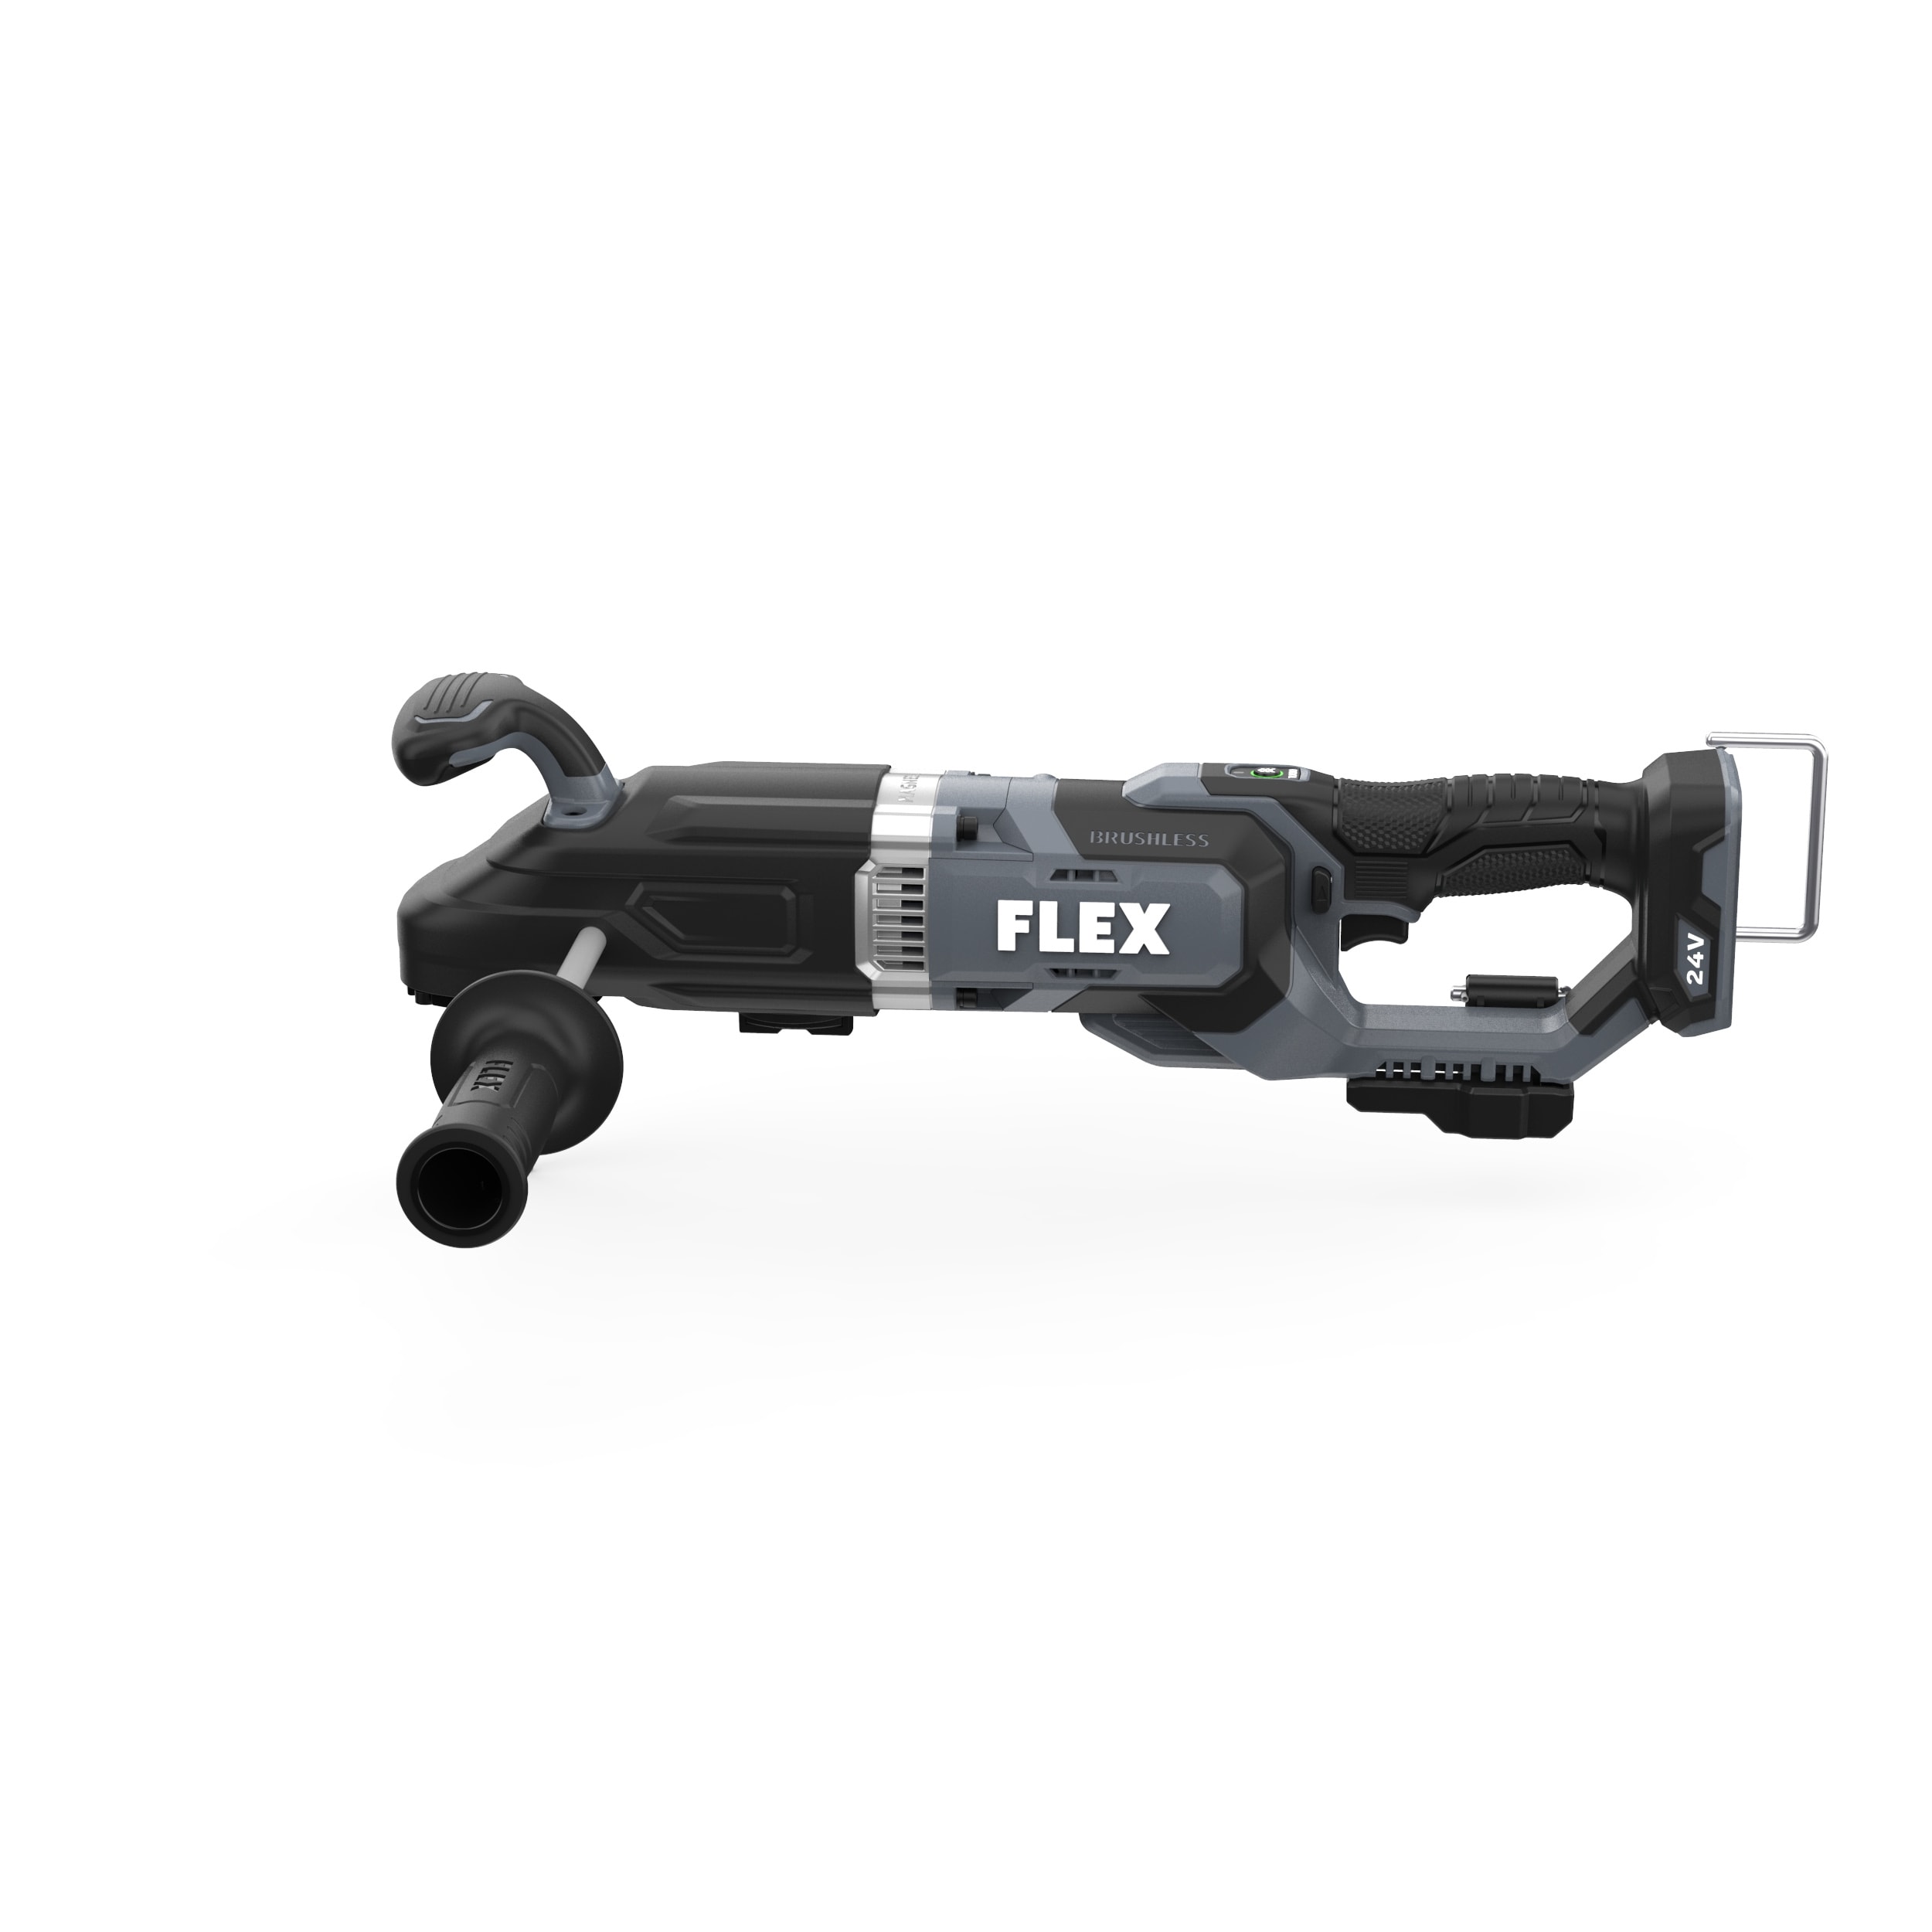 FLEX FX1681-Z 24V 2-GEAR 1/2in RIGHT ANGLE DRILL TOOL ONLY